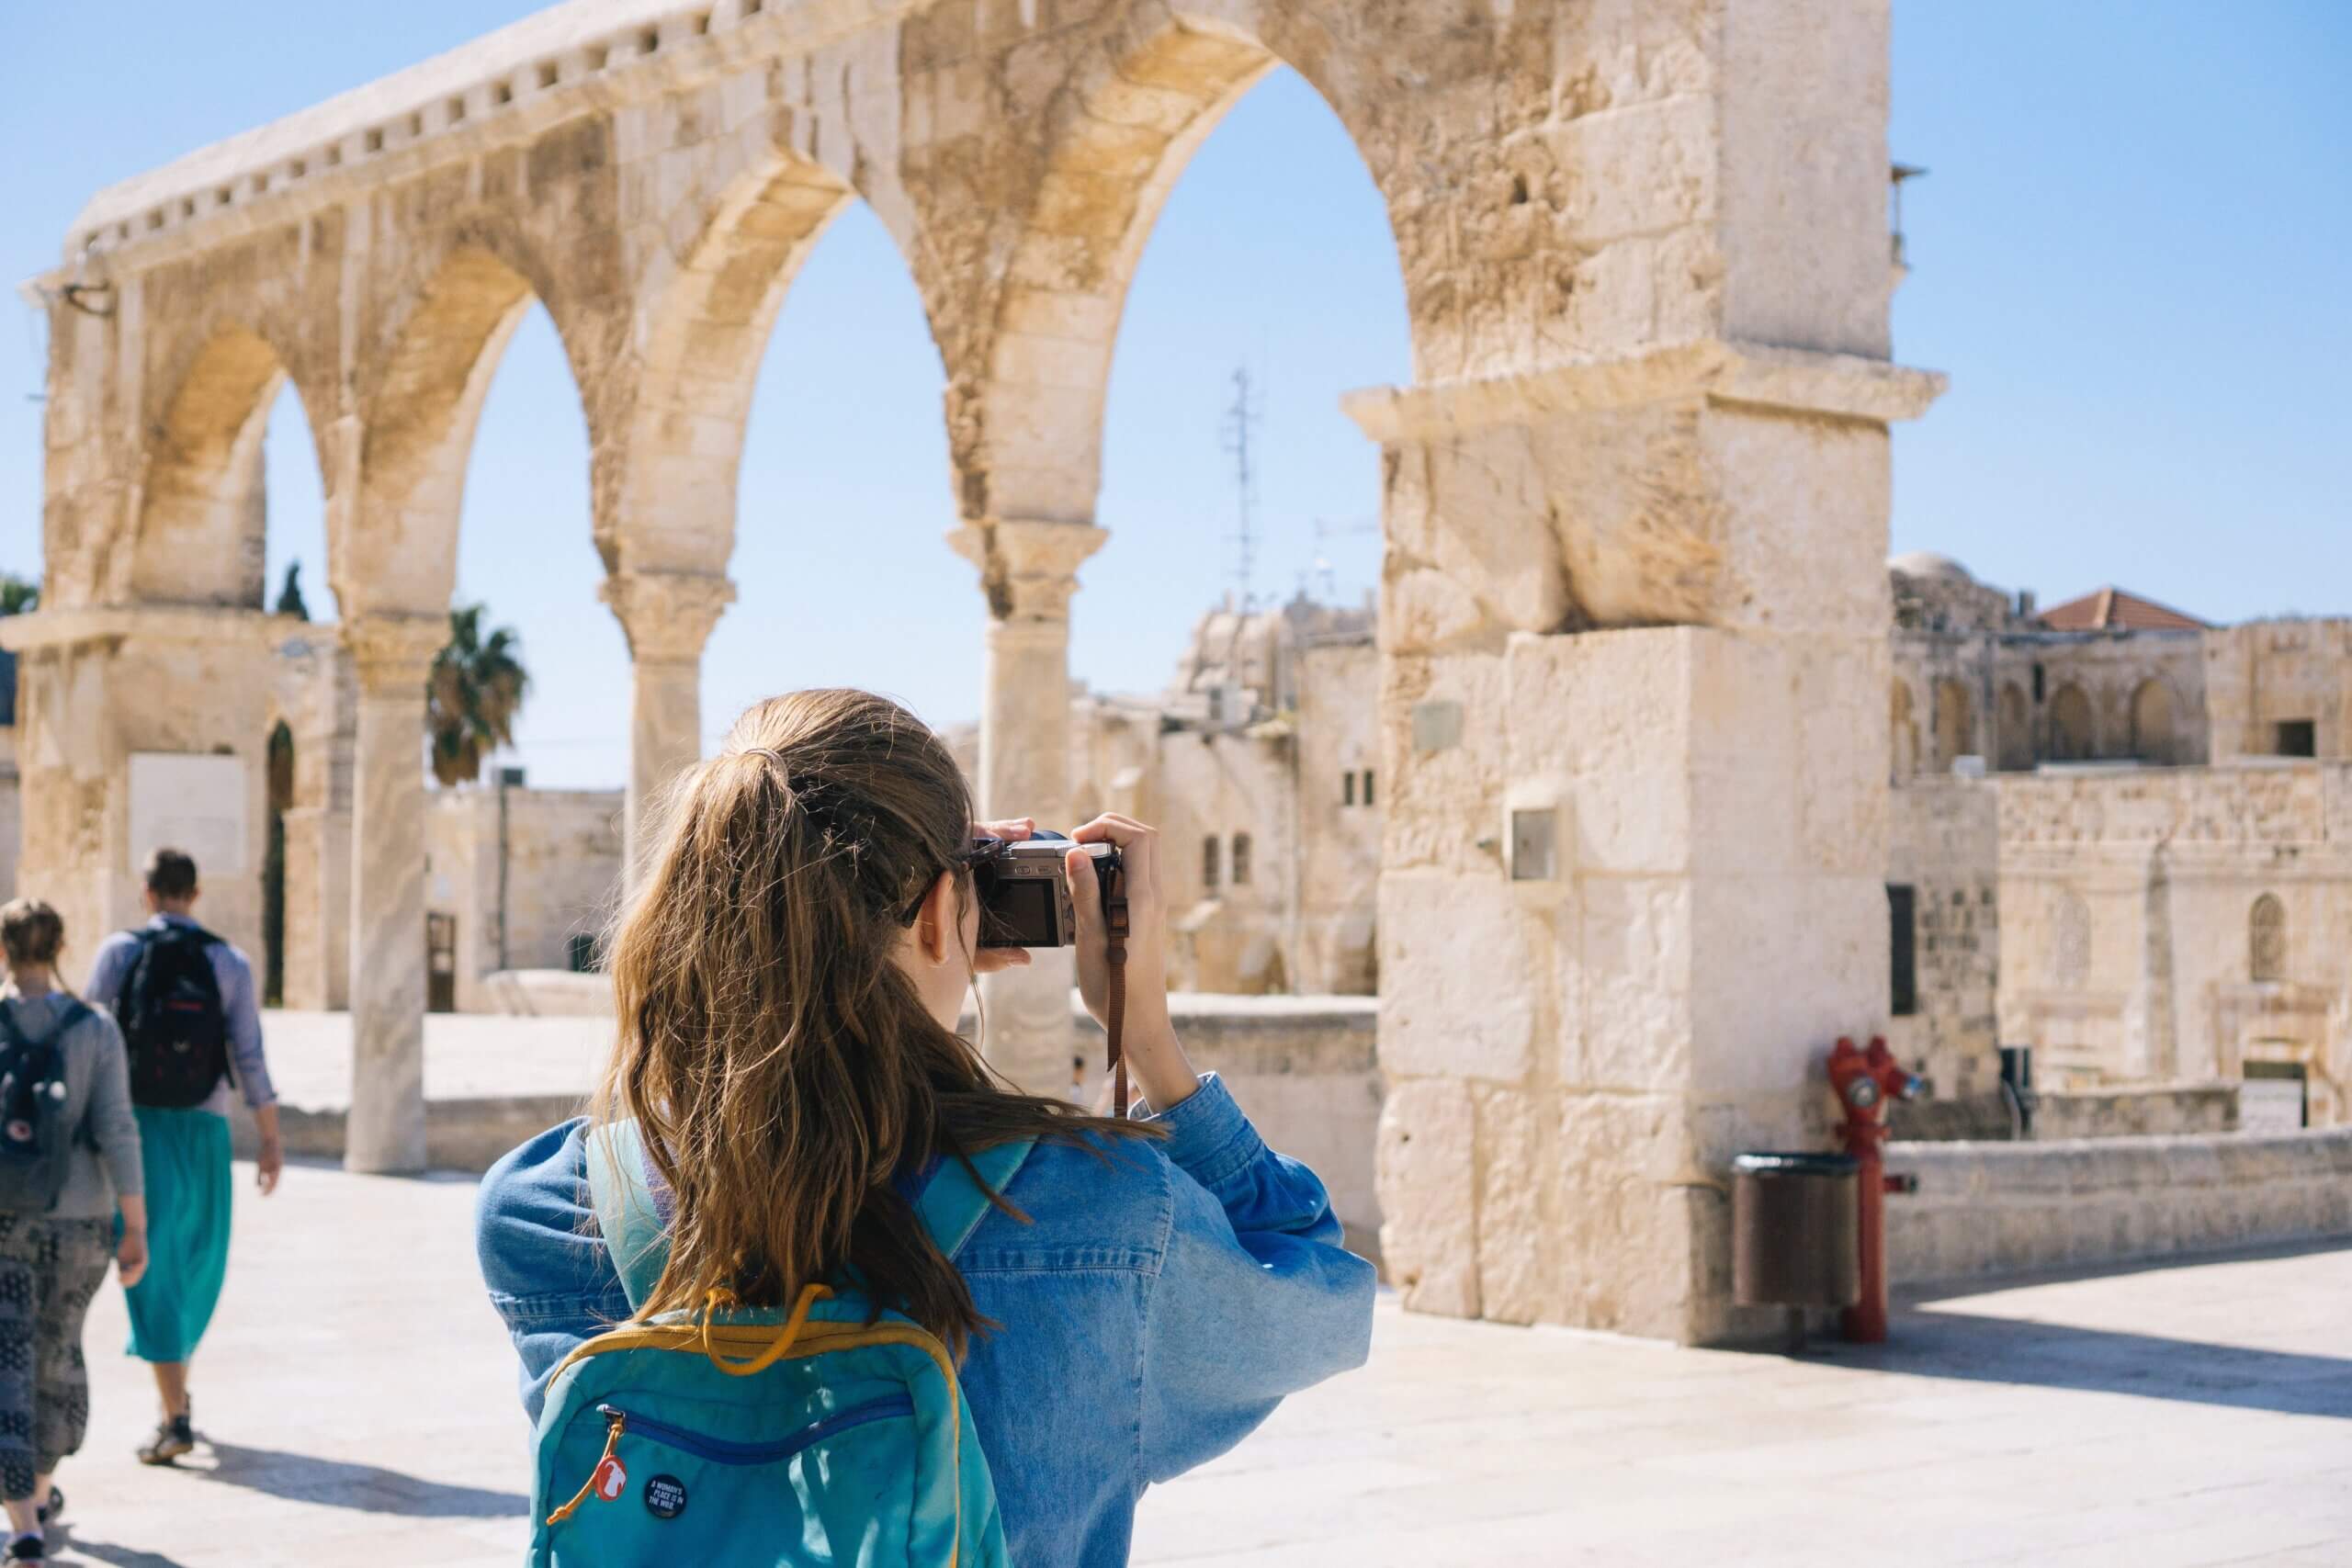 The back of a woman taking a picture of ruins on vacation.